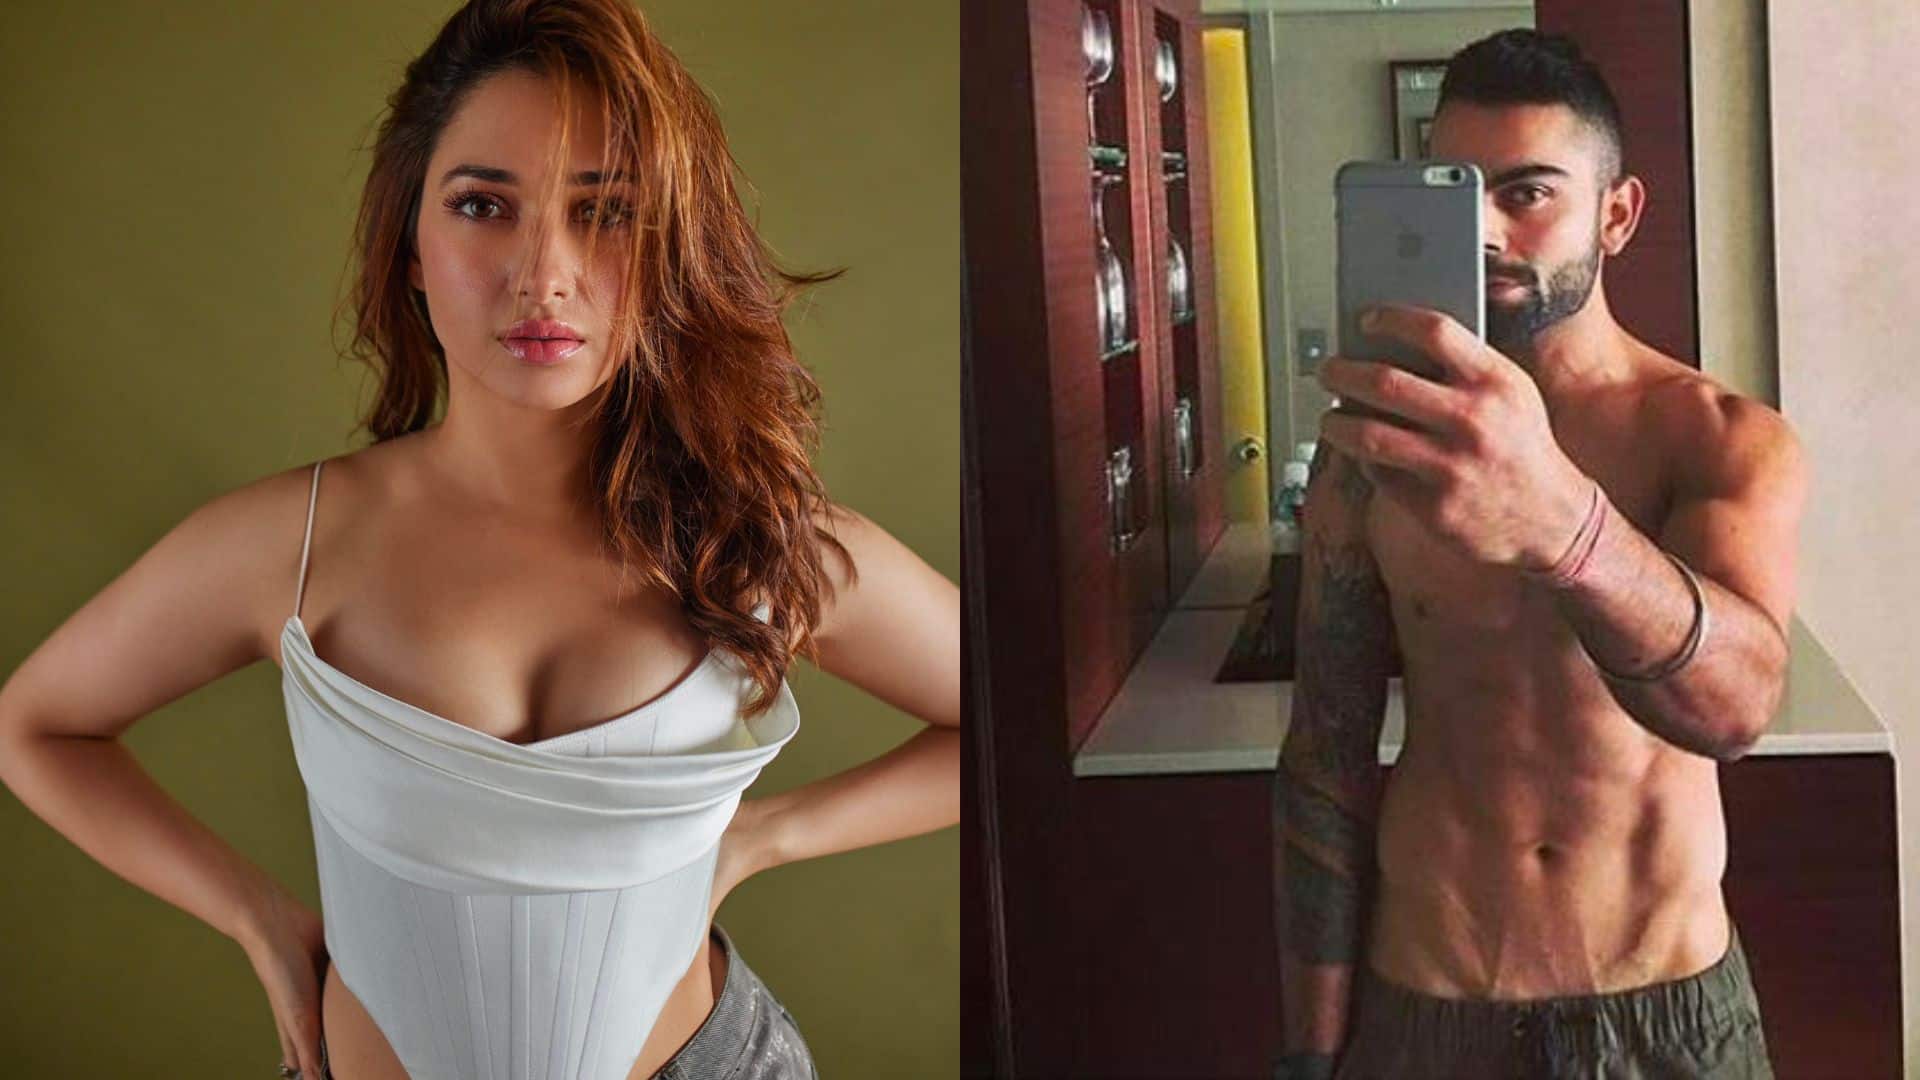 Why Is Virat Kohli Getting Linked With Lust Stories 2-Famed Tamannaah Bhatia? Were They Ex-Lovers?